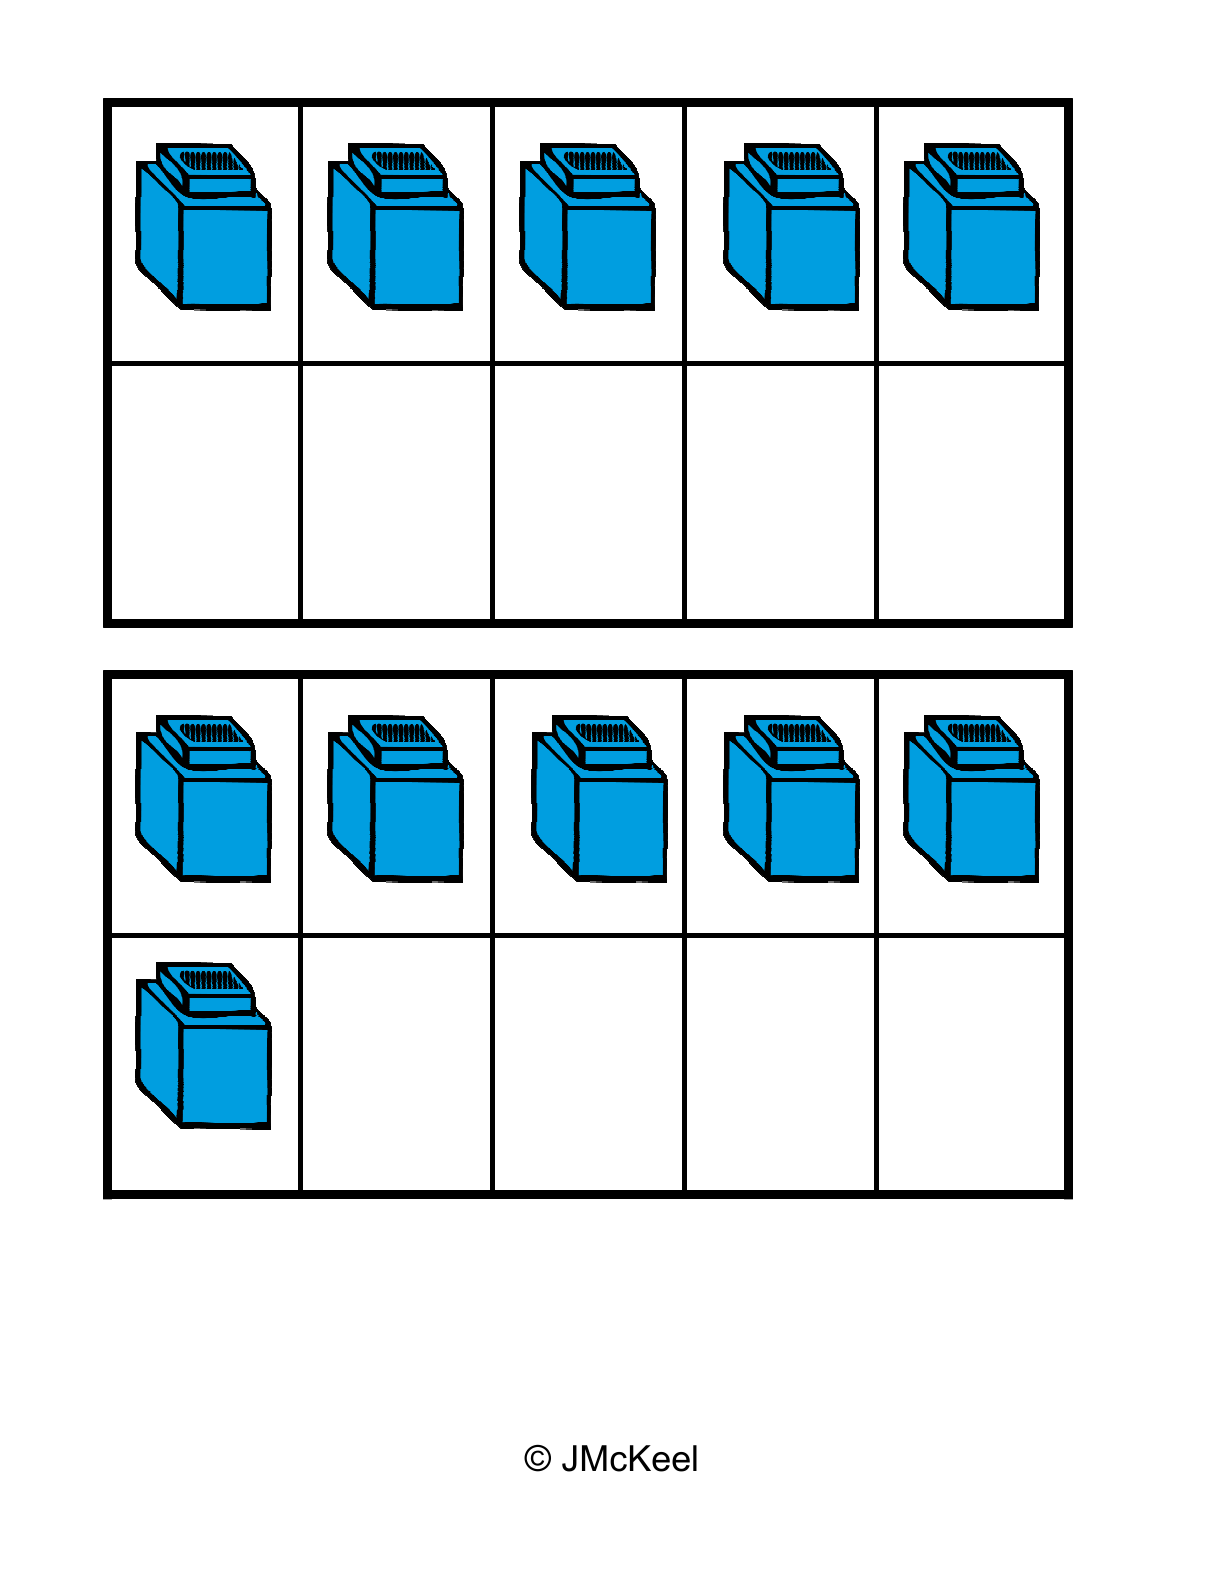 20 Stacked Congruent Cubes, ClipArt ETC